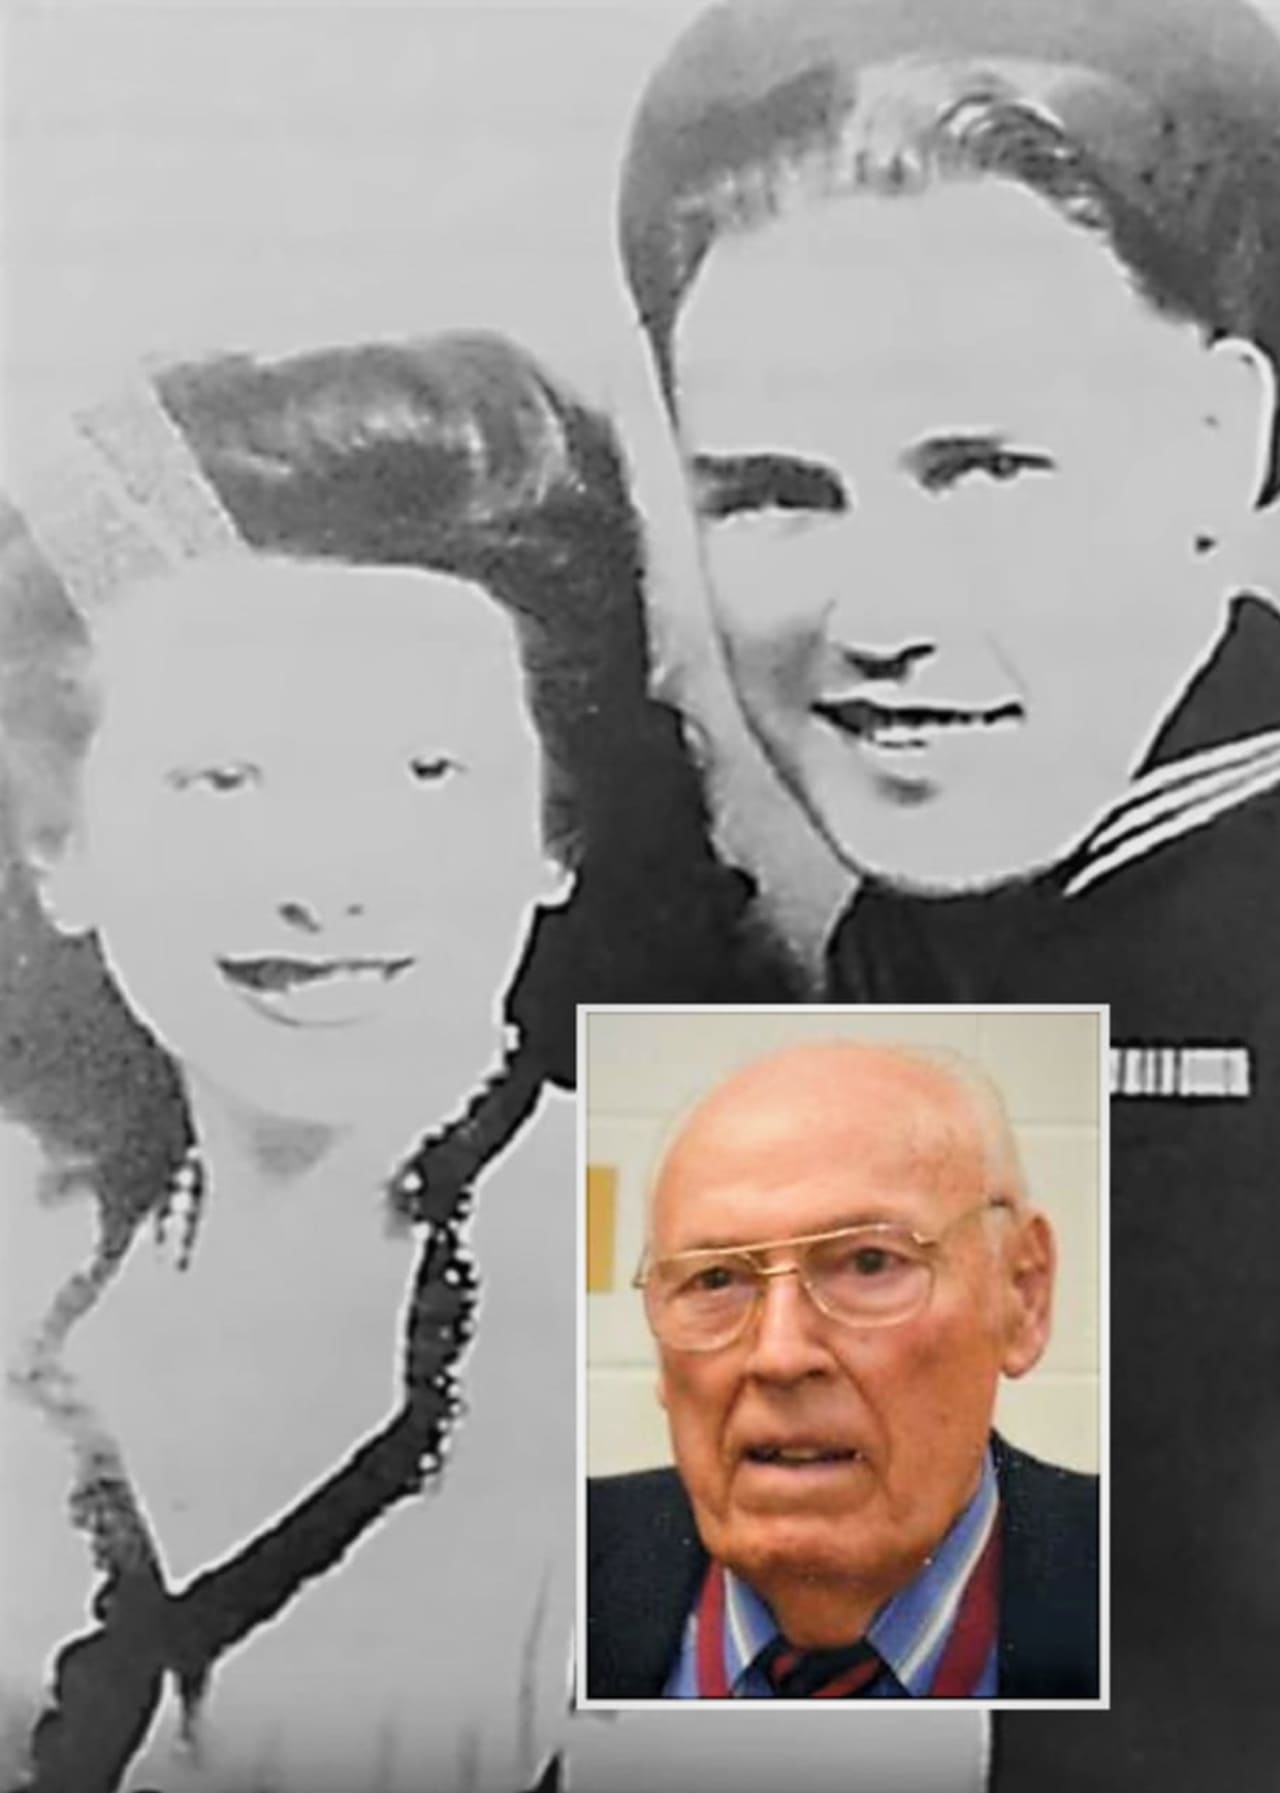 Joseph Brammer and his late widow, Antoinette, were married for 71 years.